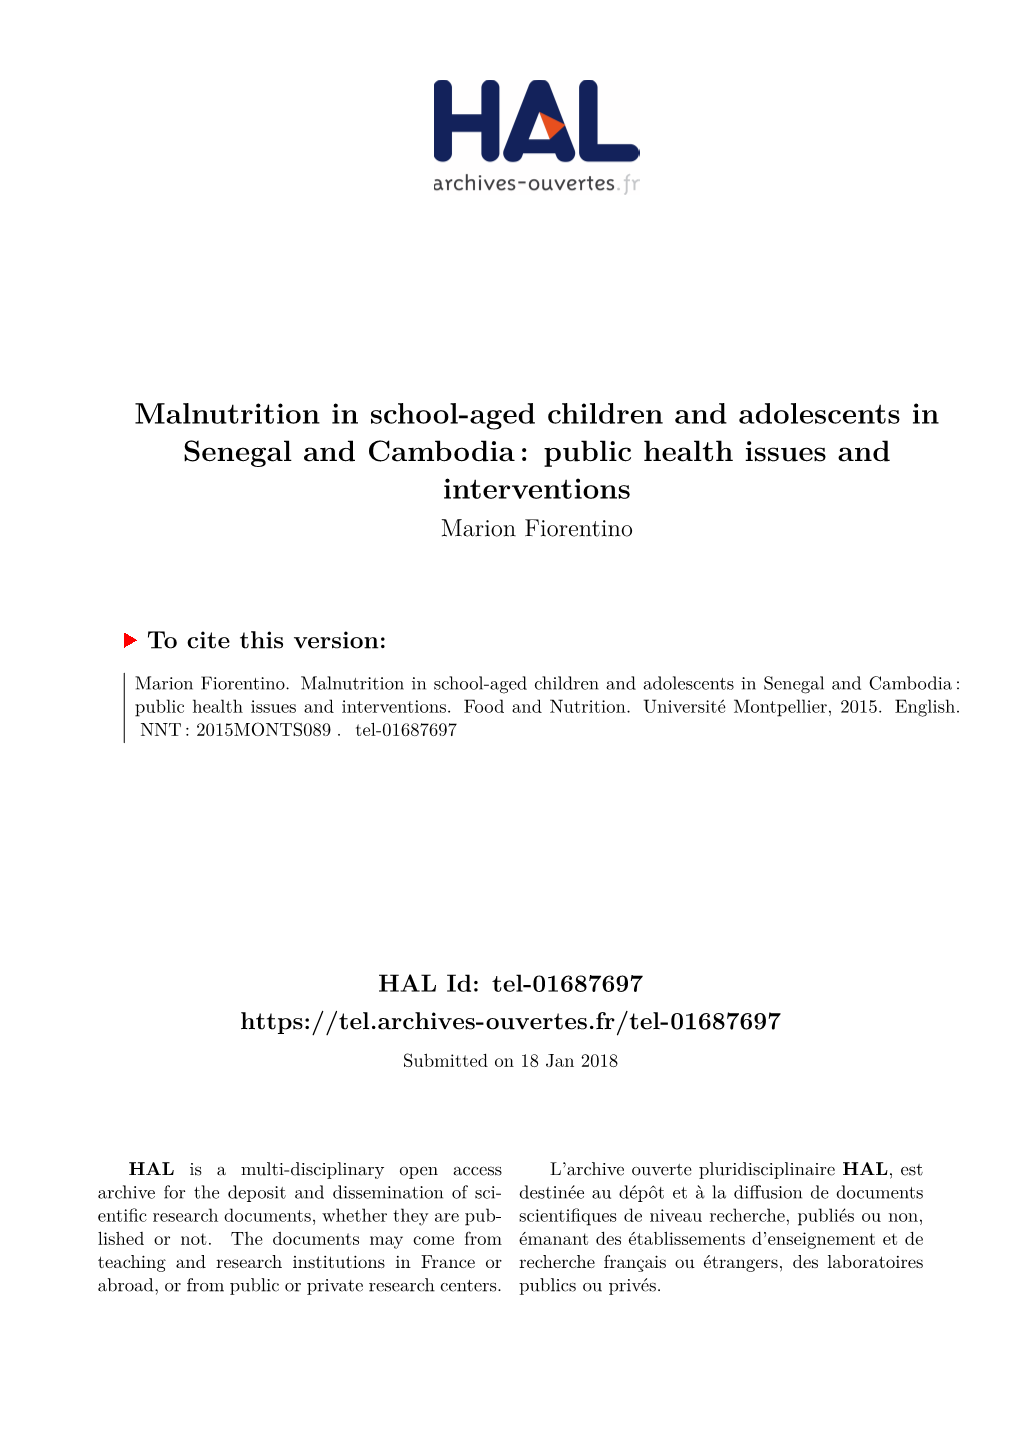 Malnutrition in School-Aged Children and Adolescents in Senegal and Cambodia : Public Health Issues and Interventions Marion Fiorentino